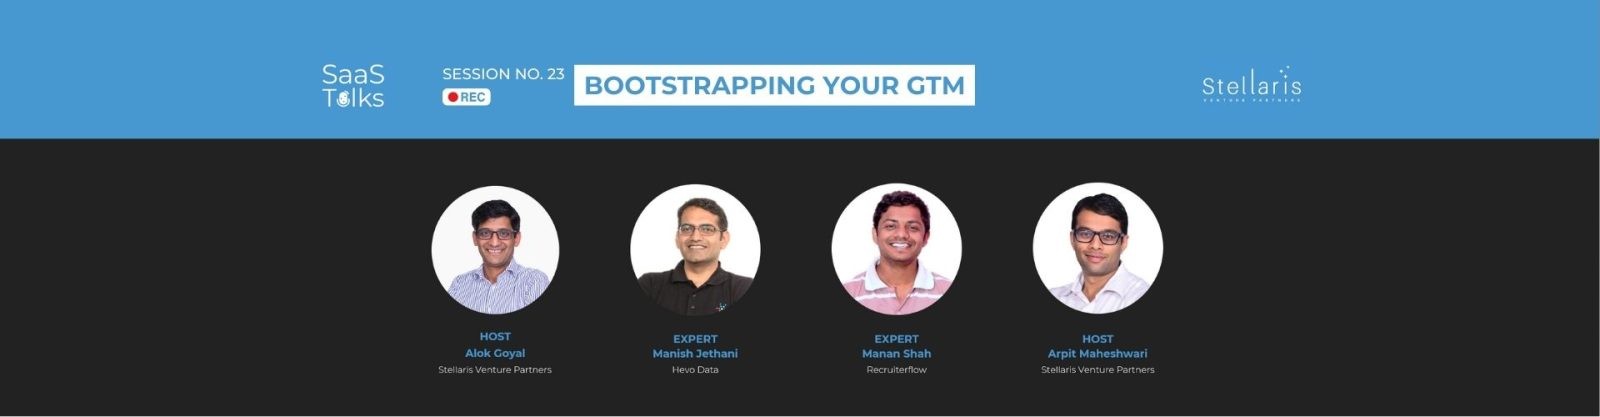 SaaS Talks #23: Bootstrapping your GTM